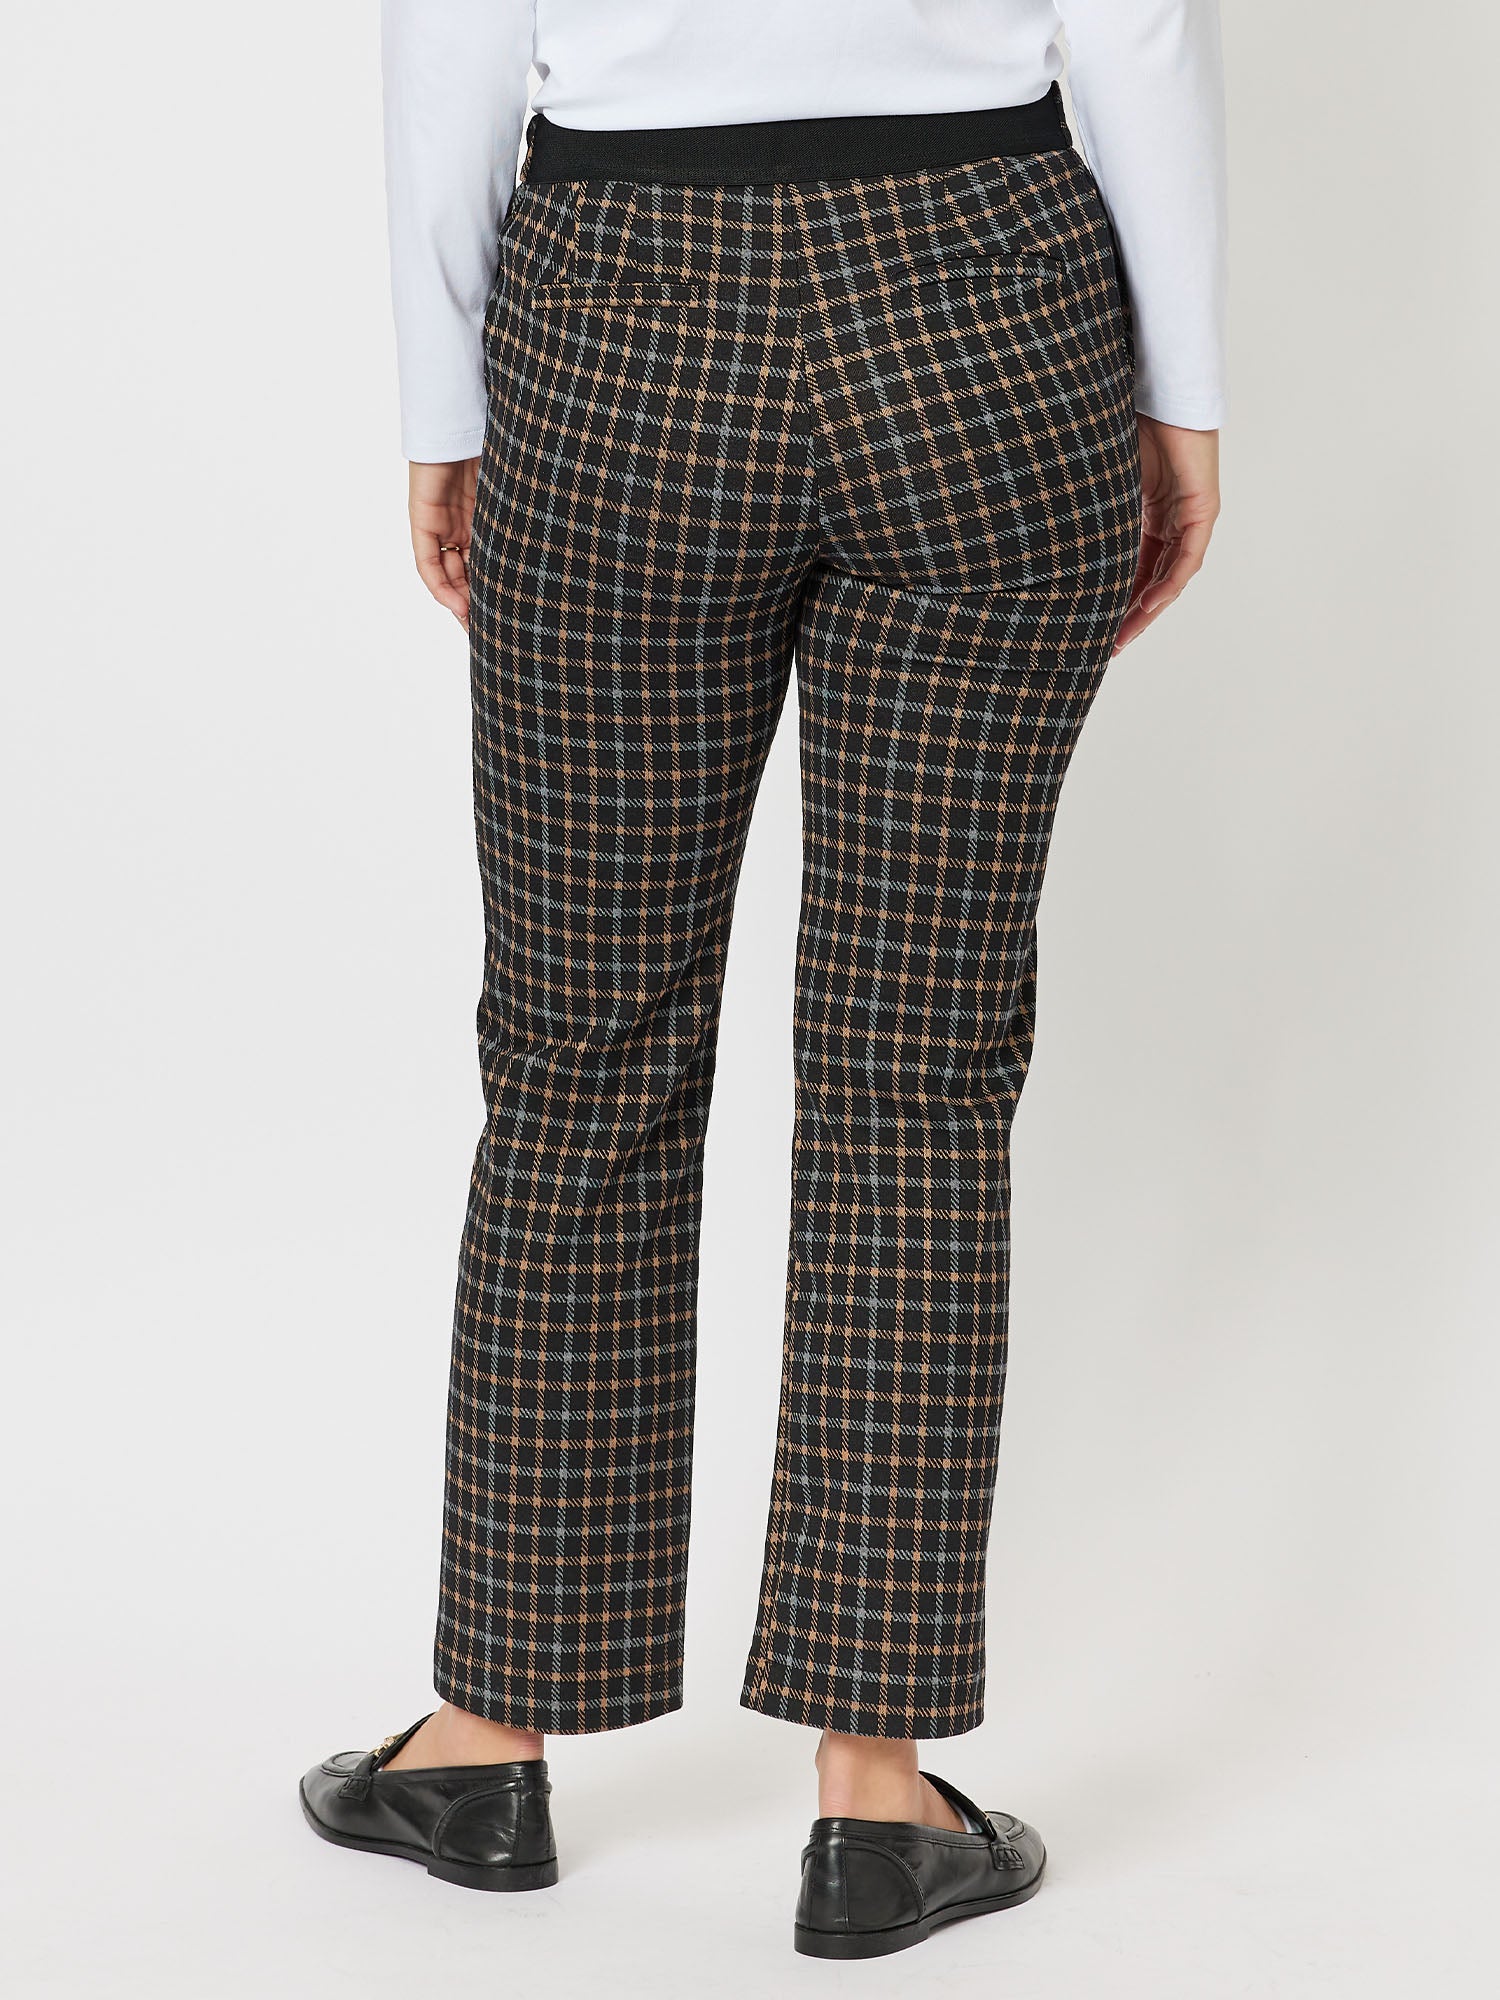 Tailored Check Trousers from Pull and Bear on 21 Buttons